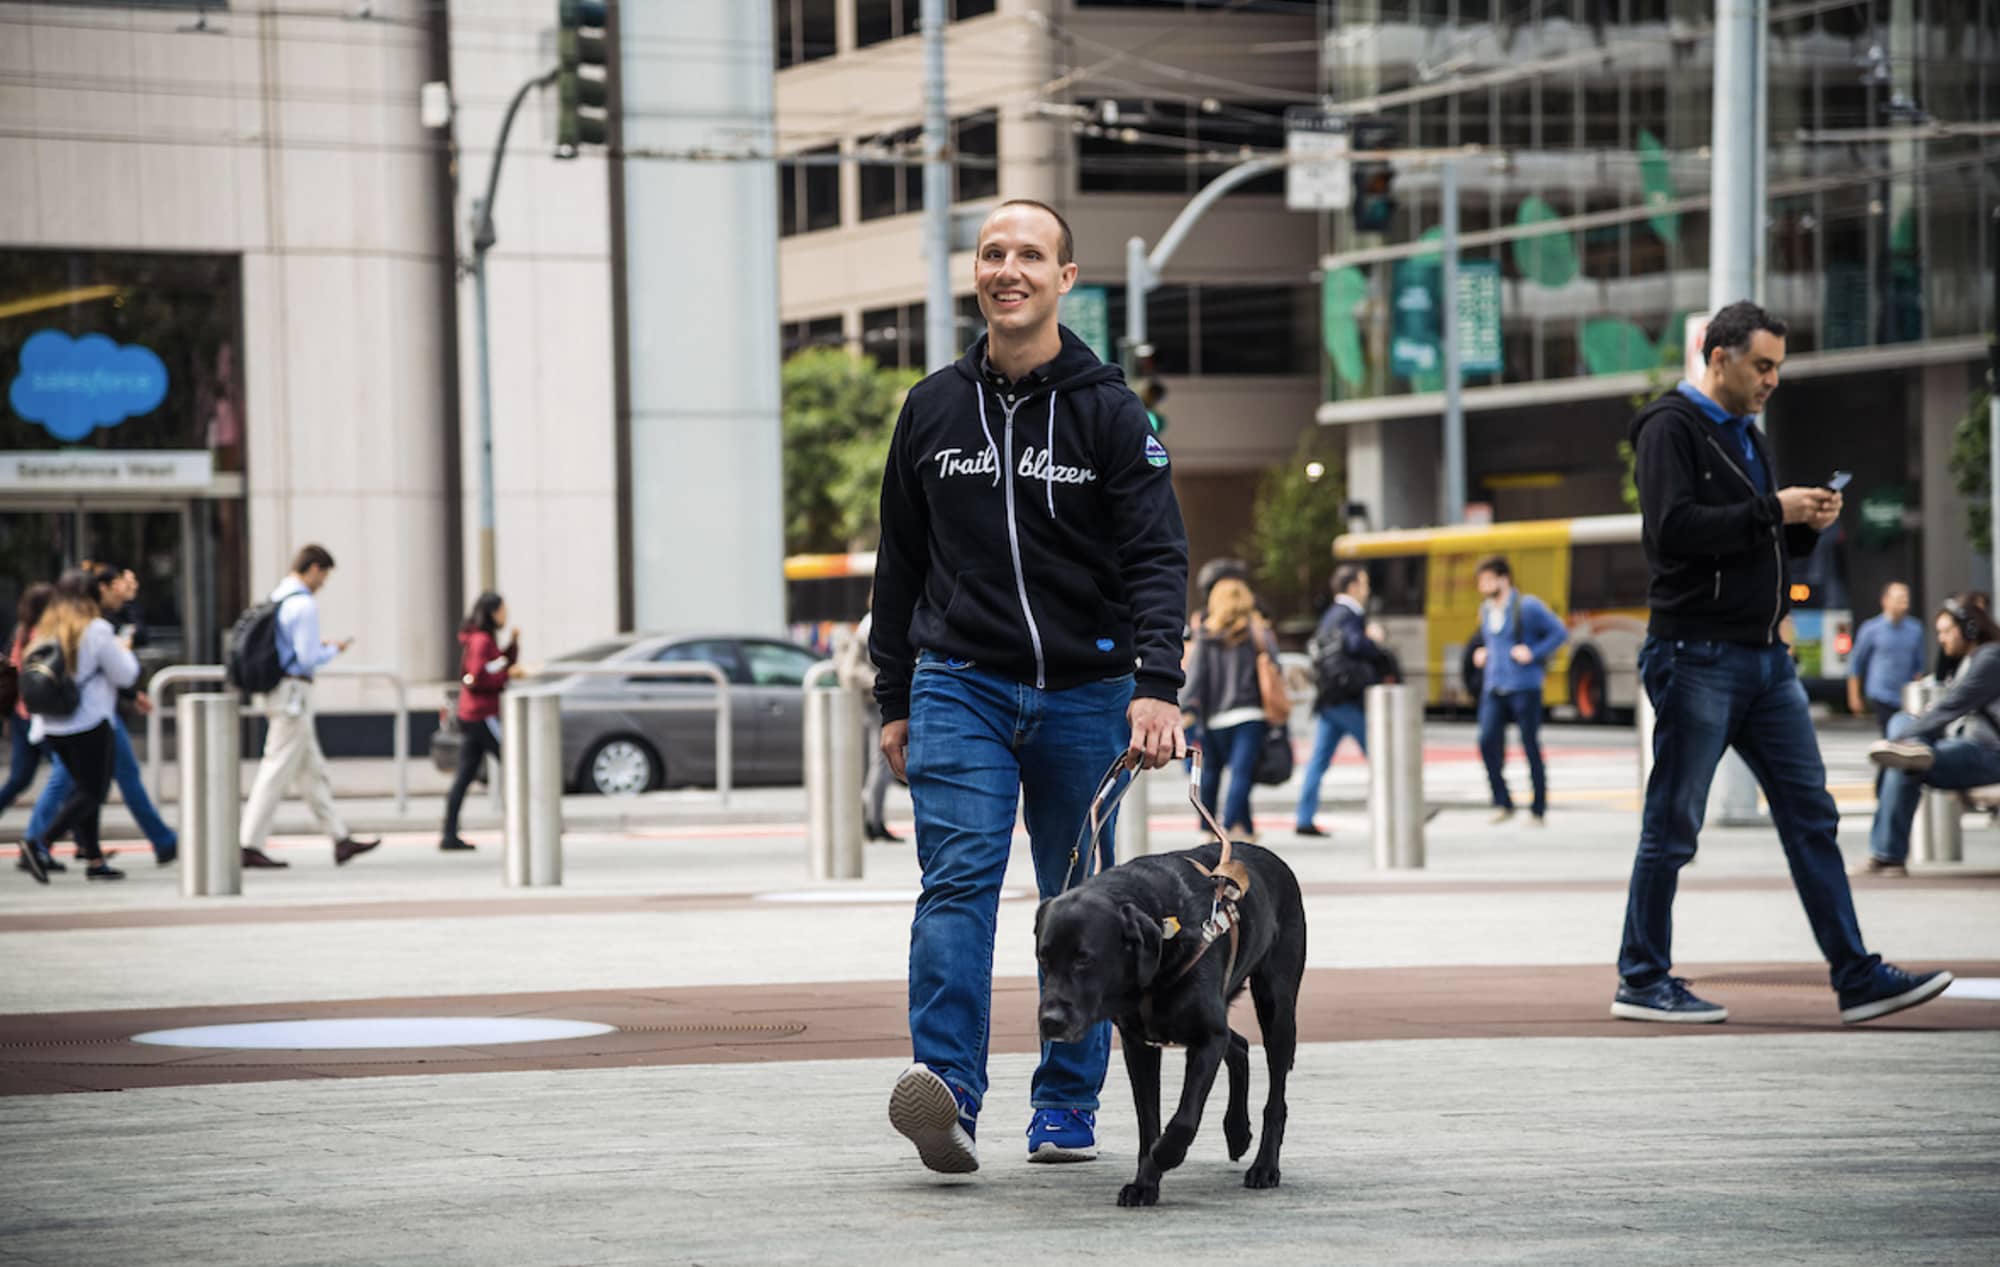 A smiling Salesforce employee wearing a Trail Blazer sweatshirt and walking with his guide dog in the city near Salesforce HQ.